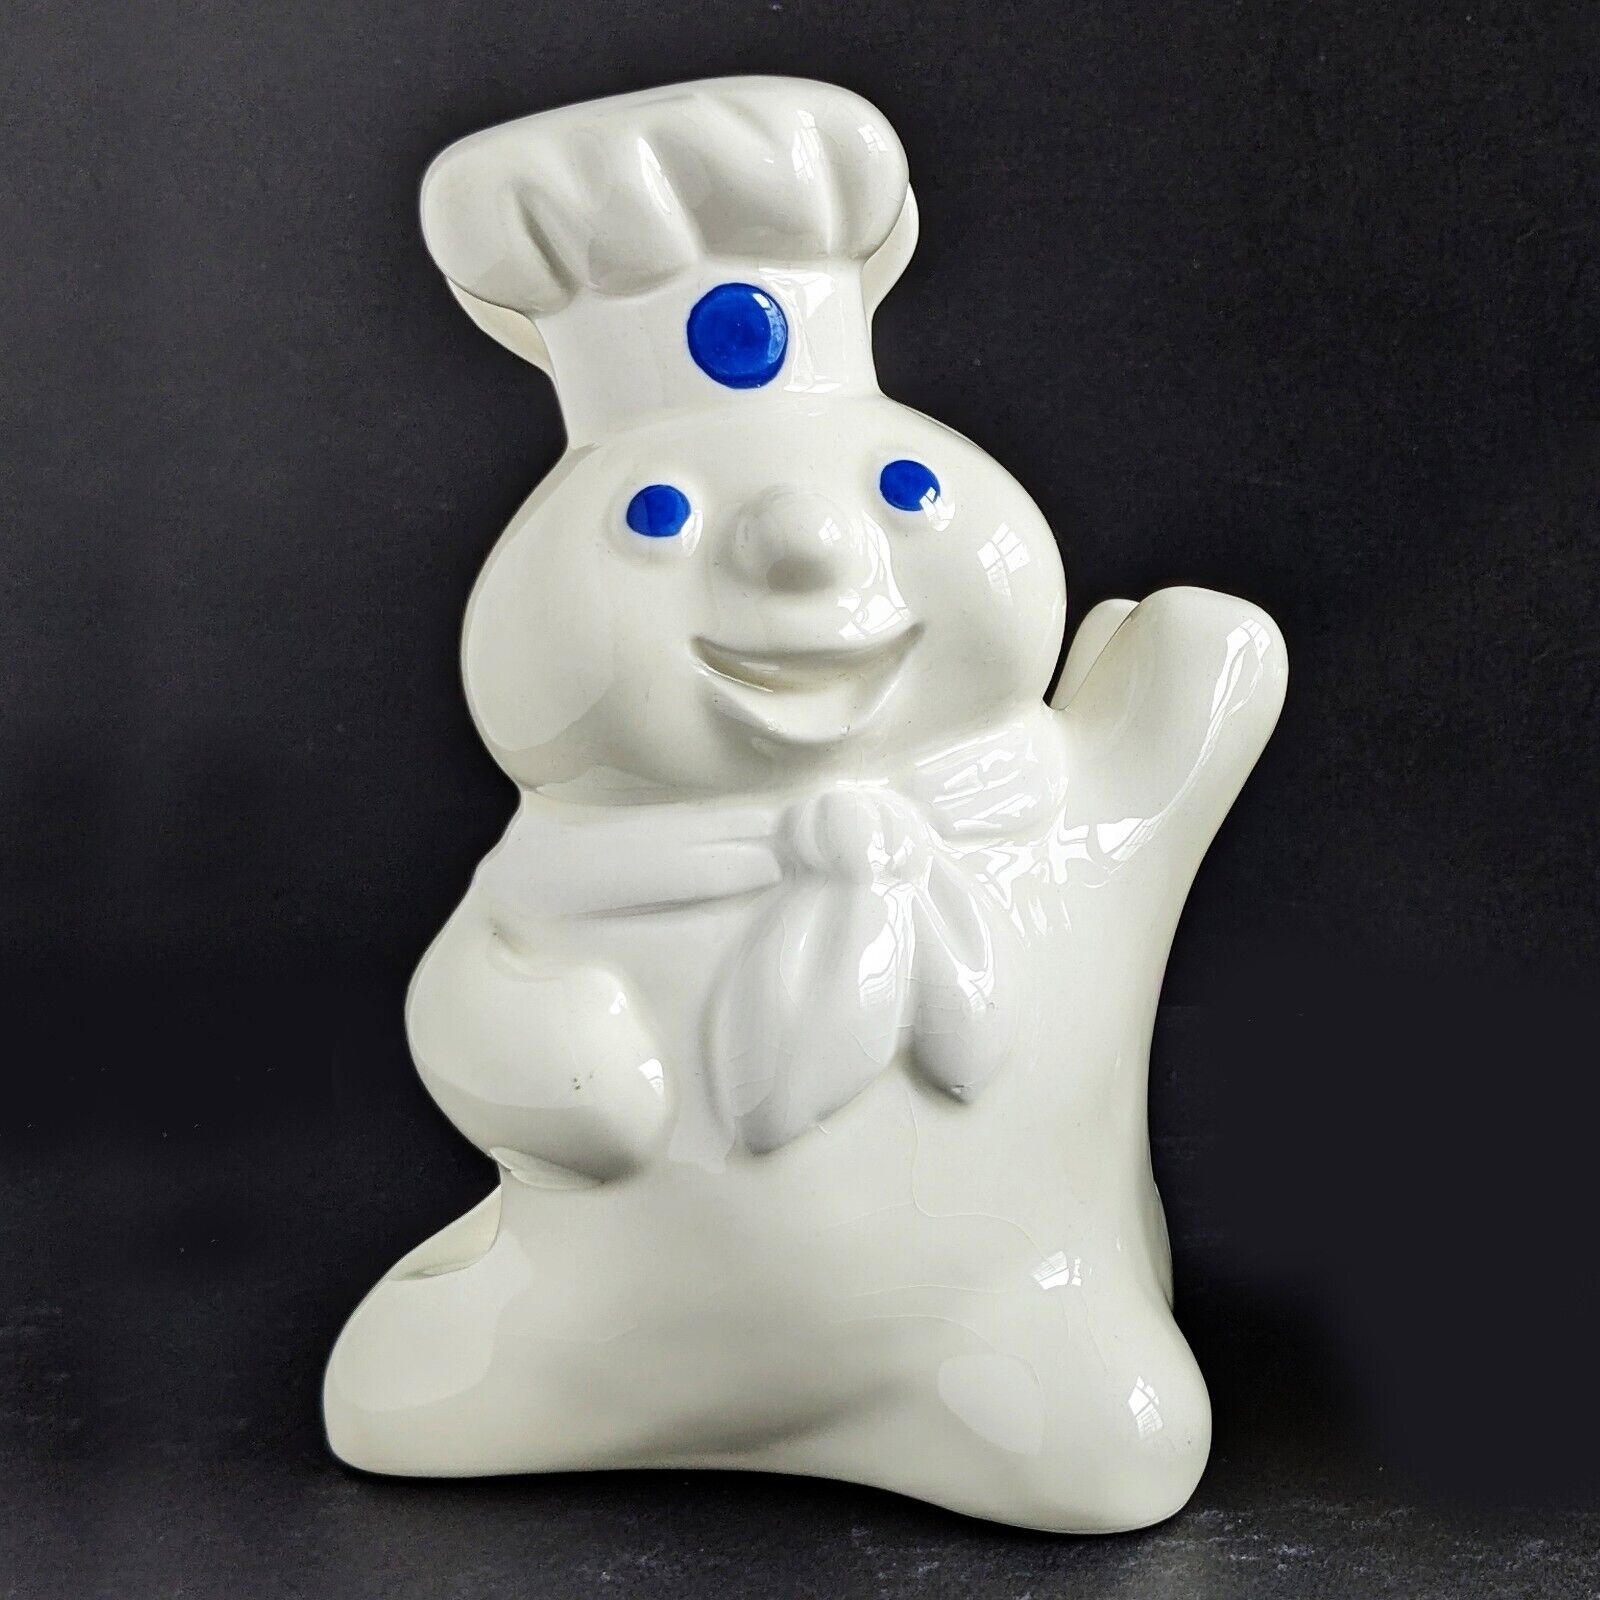 Pillsbury Doughboy 1997 Ceramic Variations For Individual Sale 20% Off for 1+